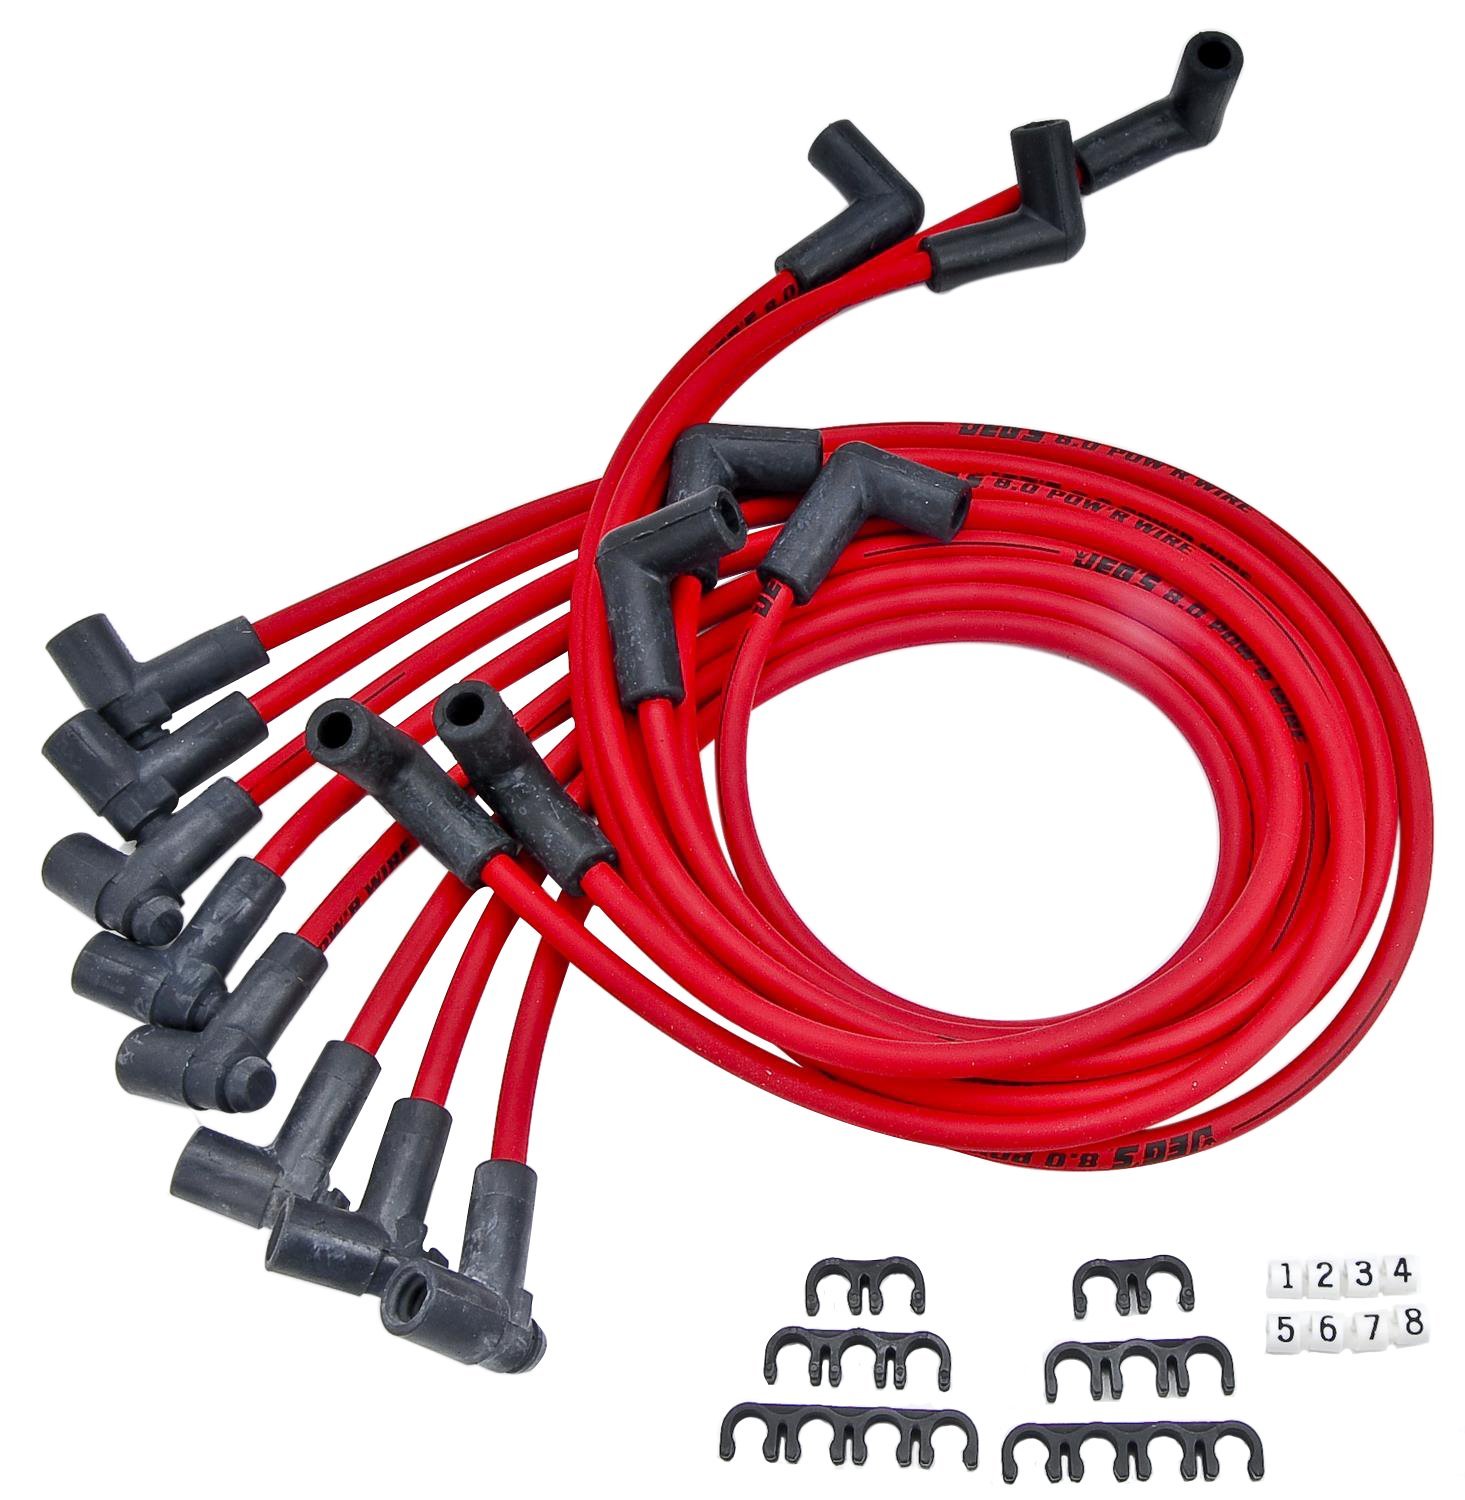 8.0mm Red Hot Pow'r Wires SBC Over Valve